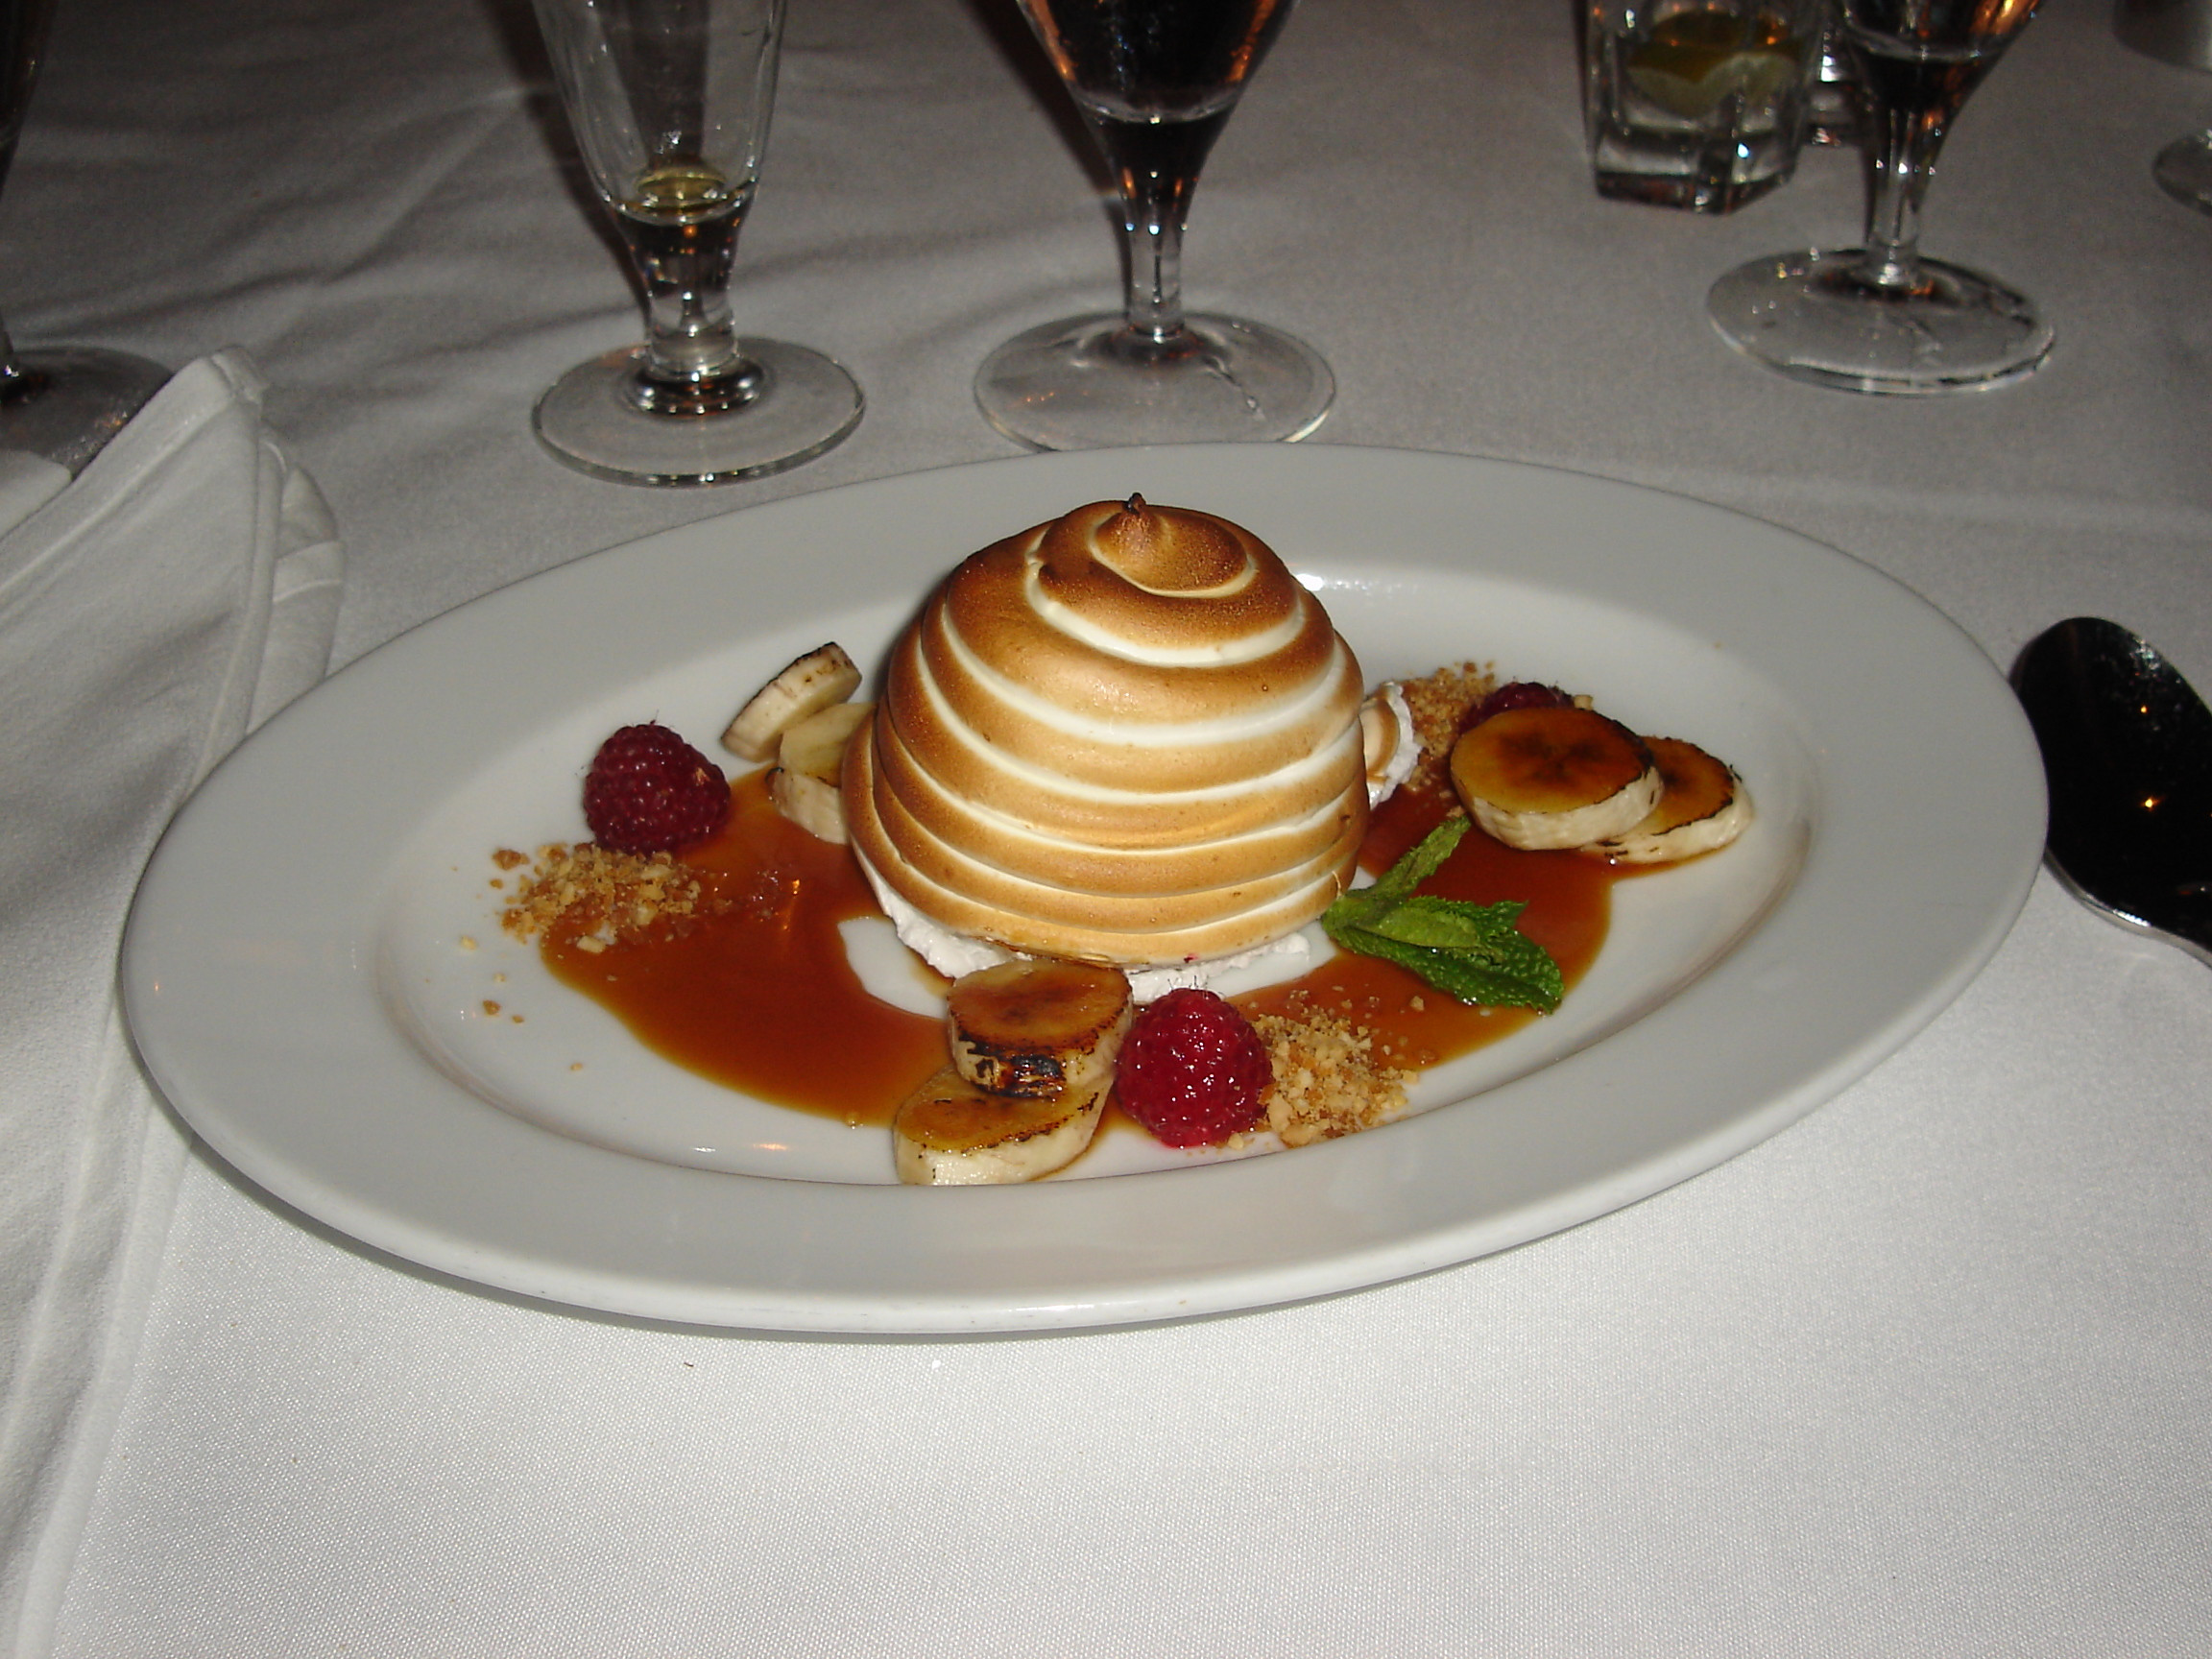 Baked Alaska Dessert
 Favourite Old English Recipes From Your Childhood Baked